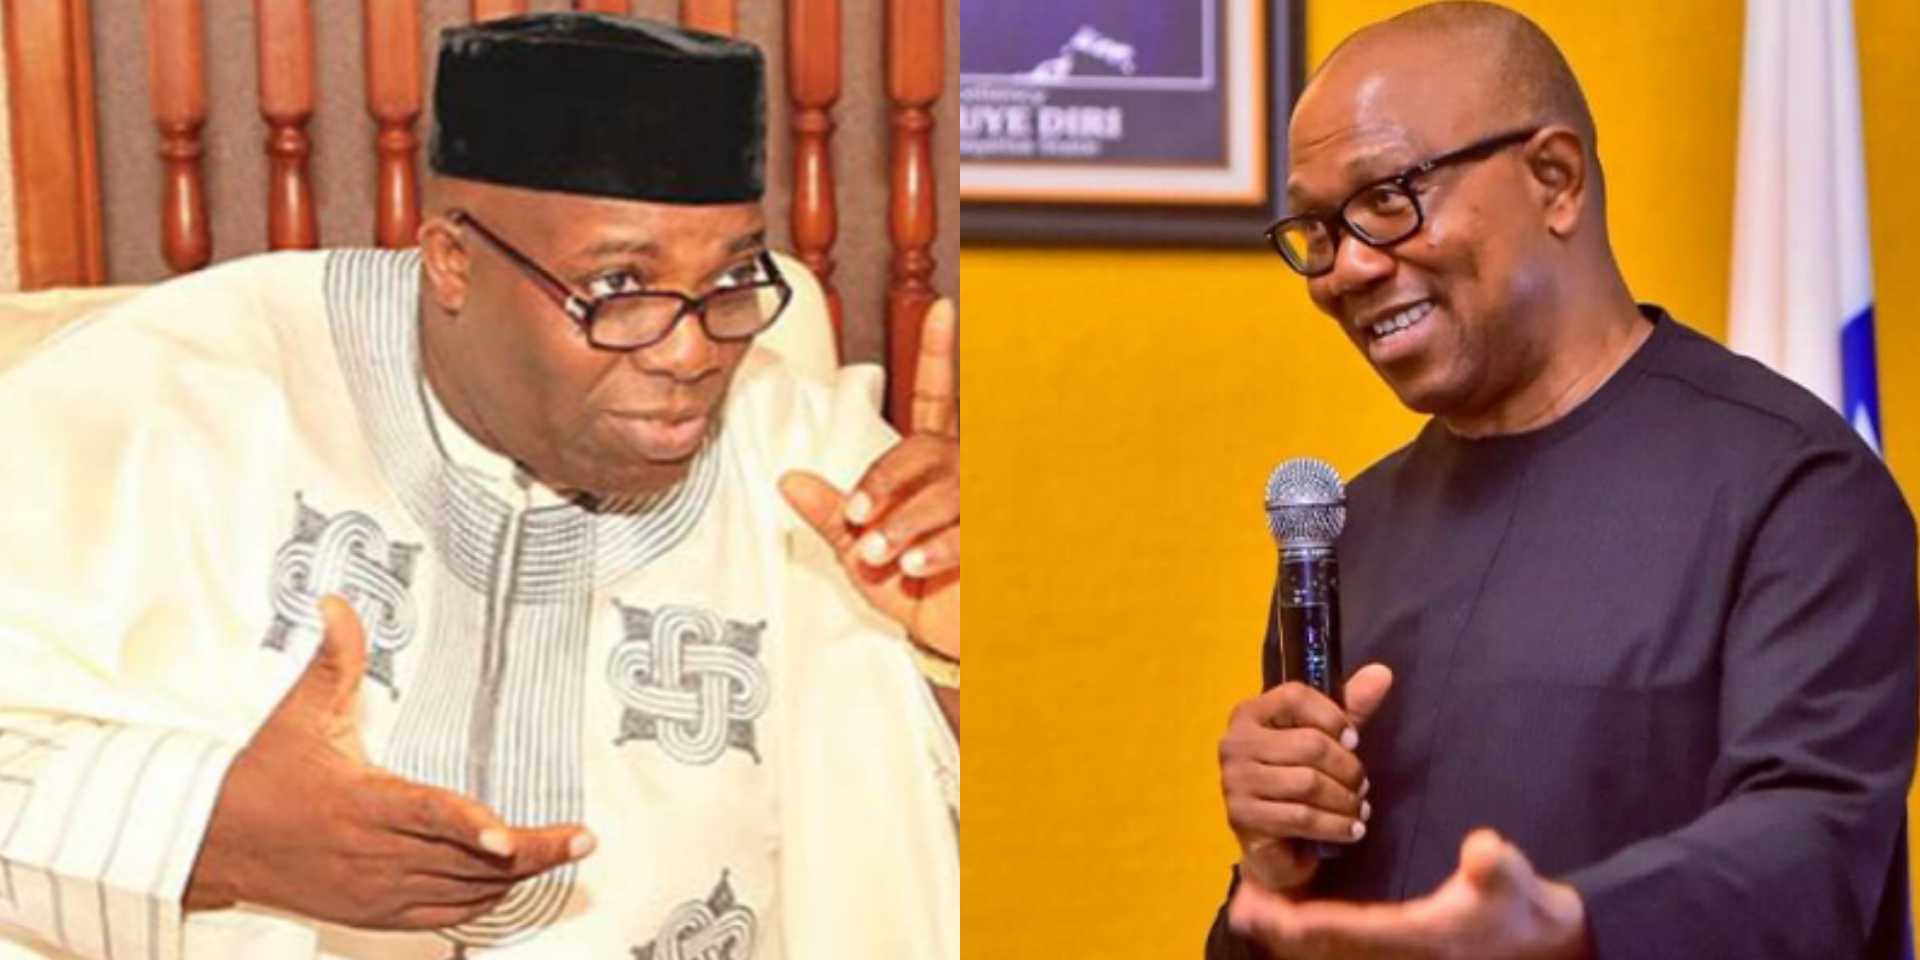 "I am a placeholder, I'll be substituted" - Doyin Okupe clears the air after he was announced Obi's running mate